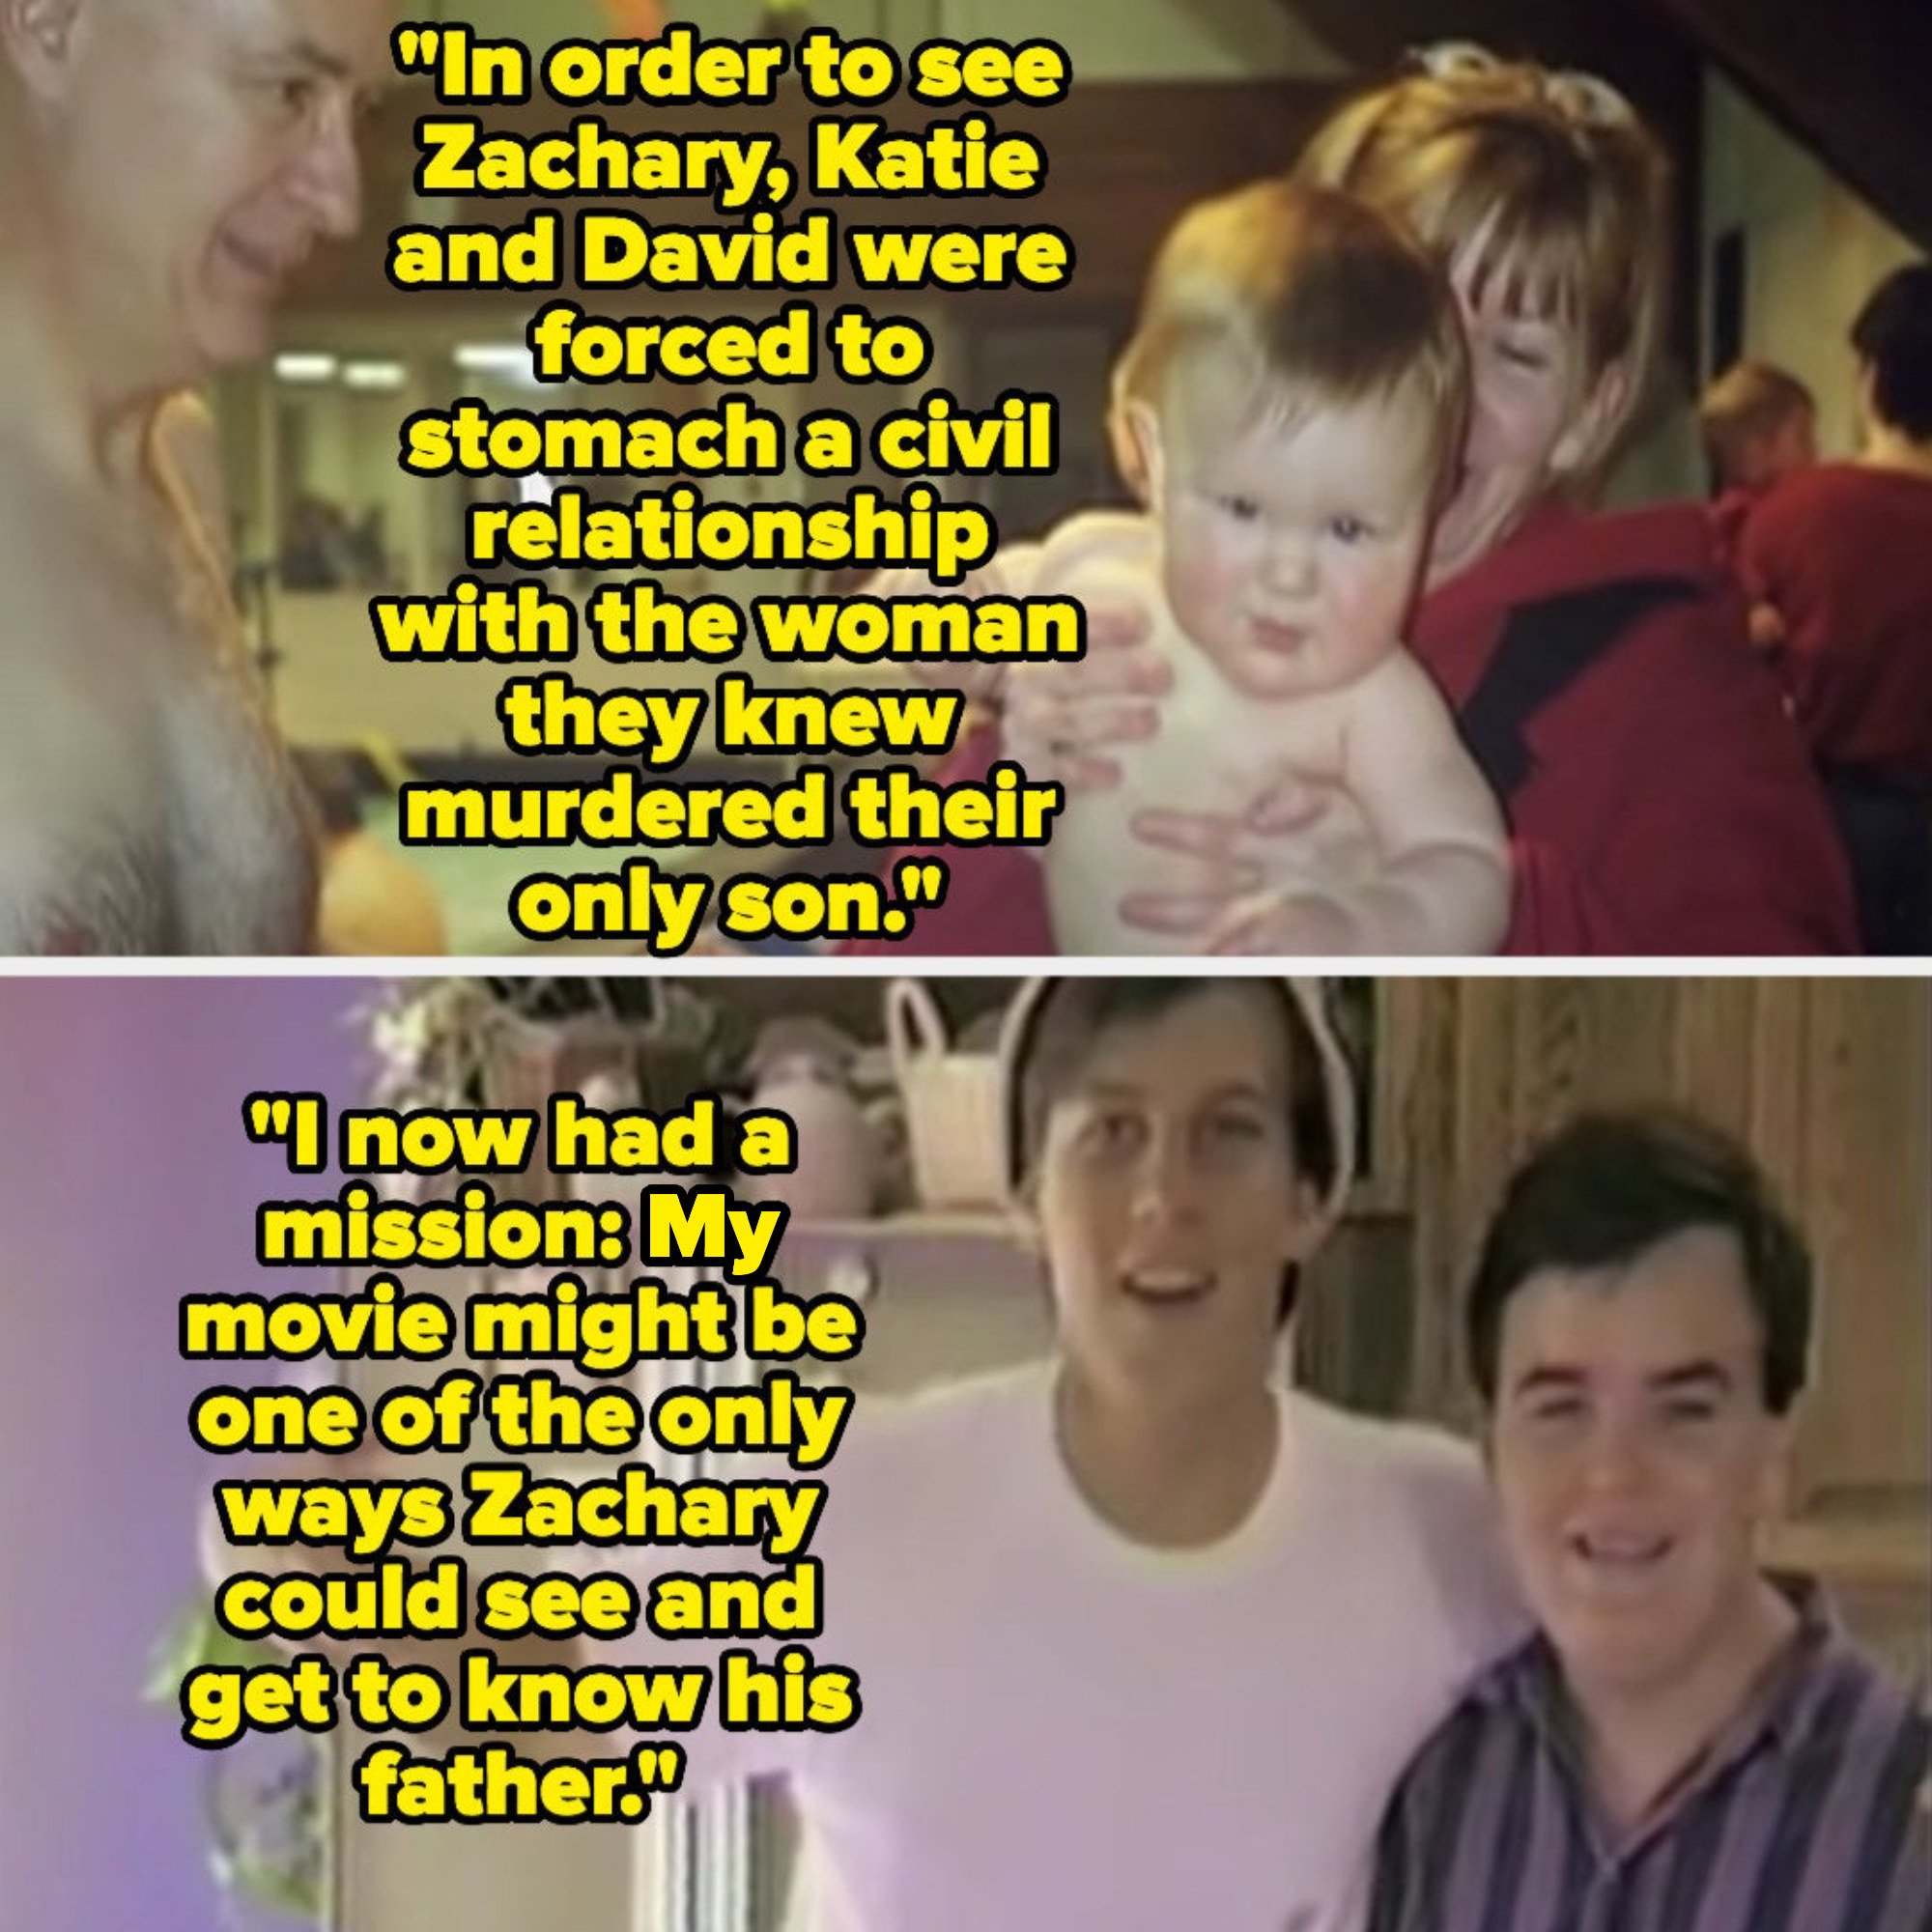 Kurt Kuenne describing how Andrew had to have a civil relationship with their son&#x27;s murderer to be able to see Zachary, and how he took on a mission to make a movie so Zachary could get to know his father